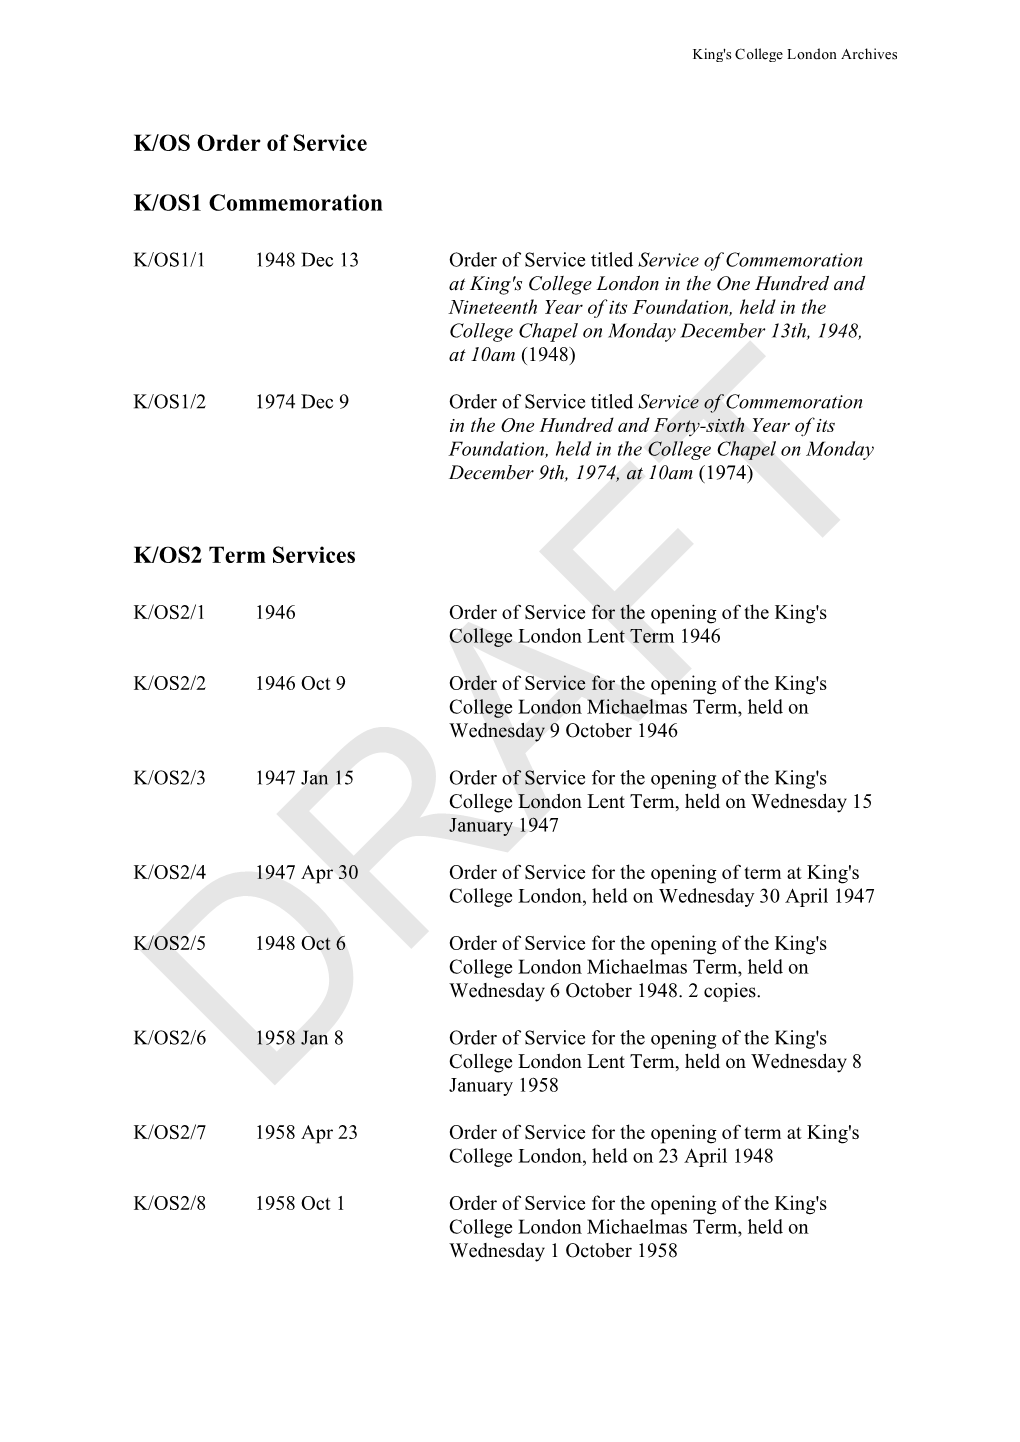 K/OS Orders of Service Draft Catalogue